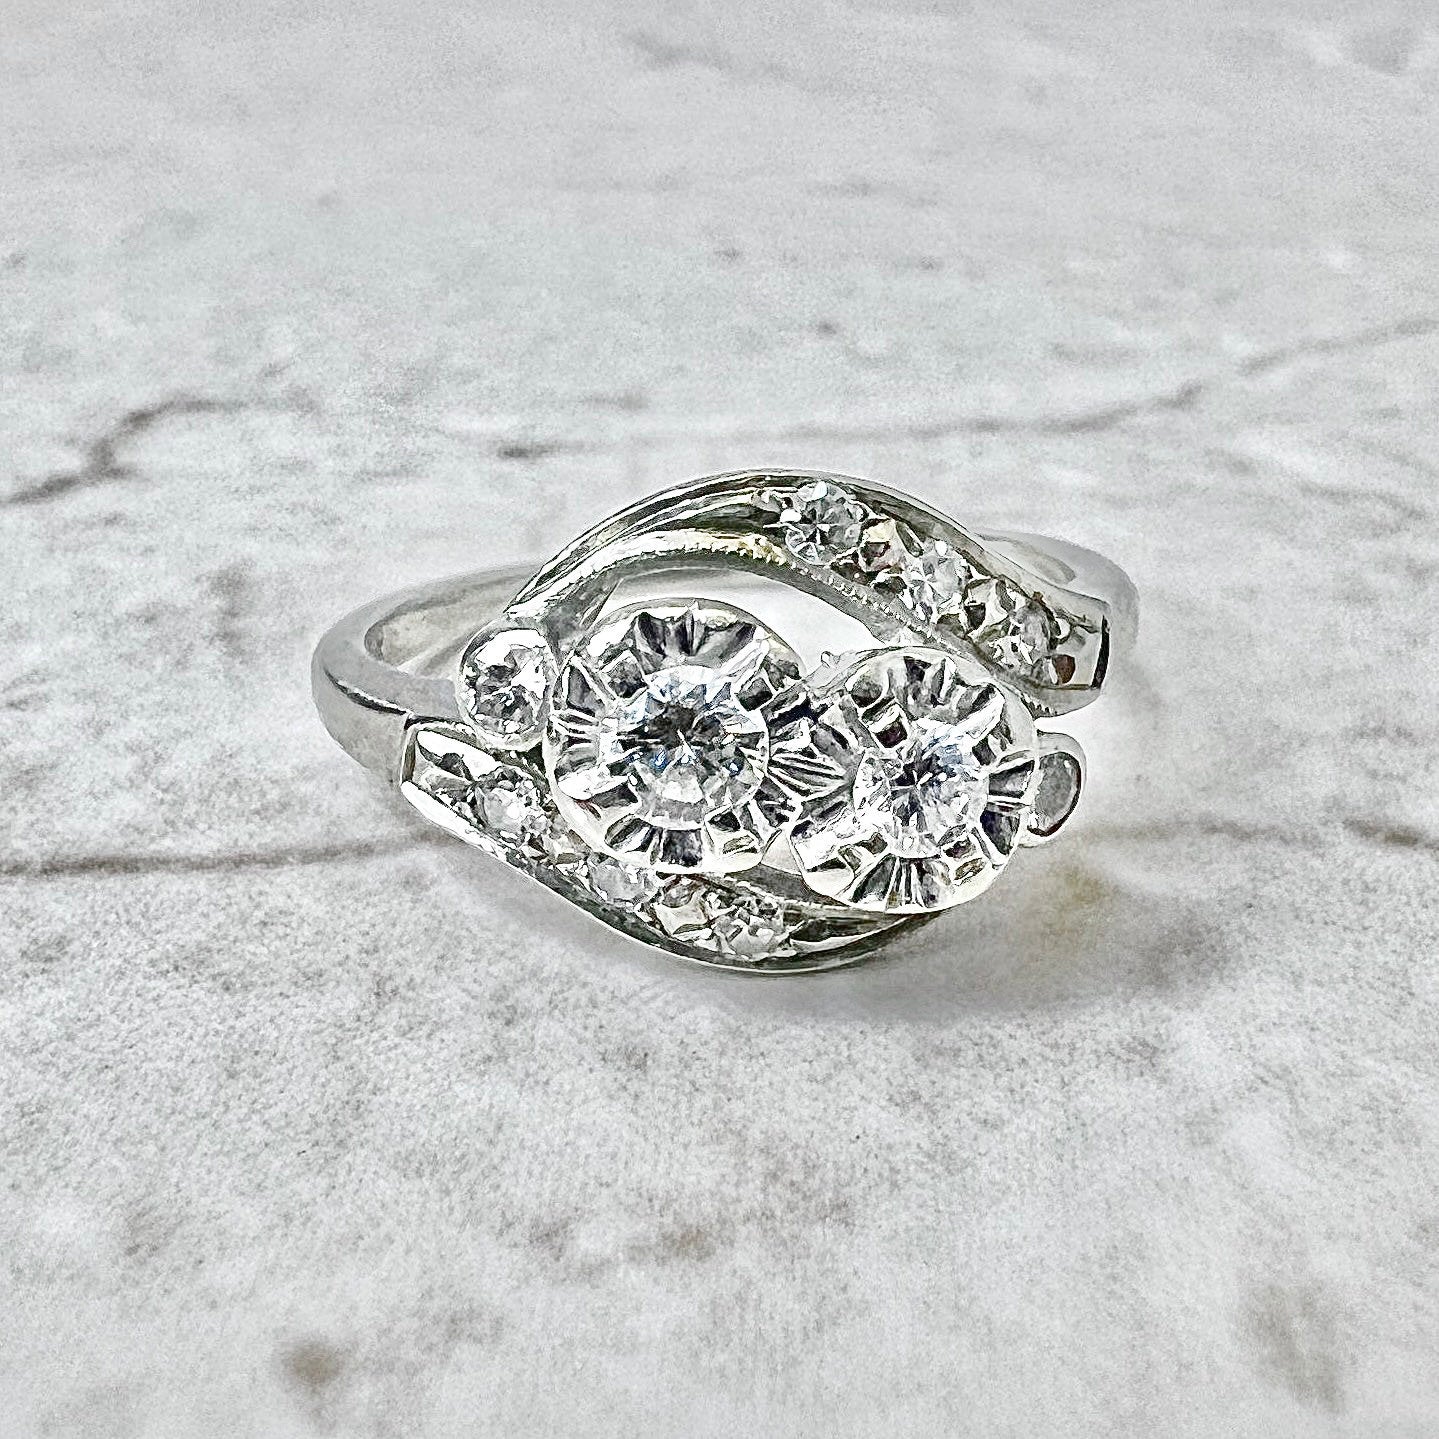 Vintage 14K Toi Et Moi Diamond Ring - White Gold Bypass Ring - 2 Stone Ring - Best Gifts For Her - Valentine’s Day Gifts - Promise Ring